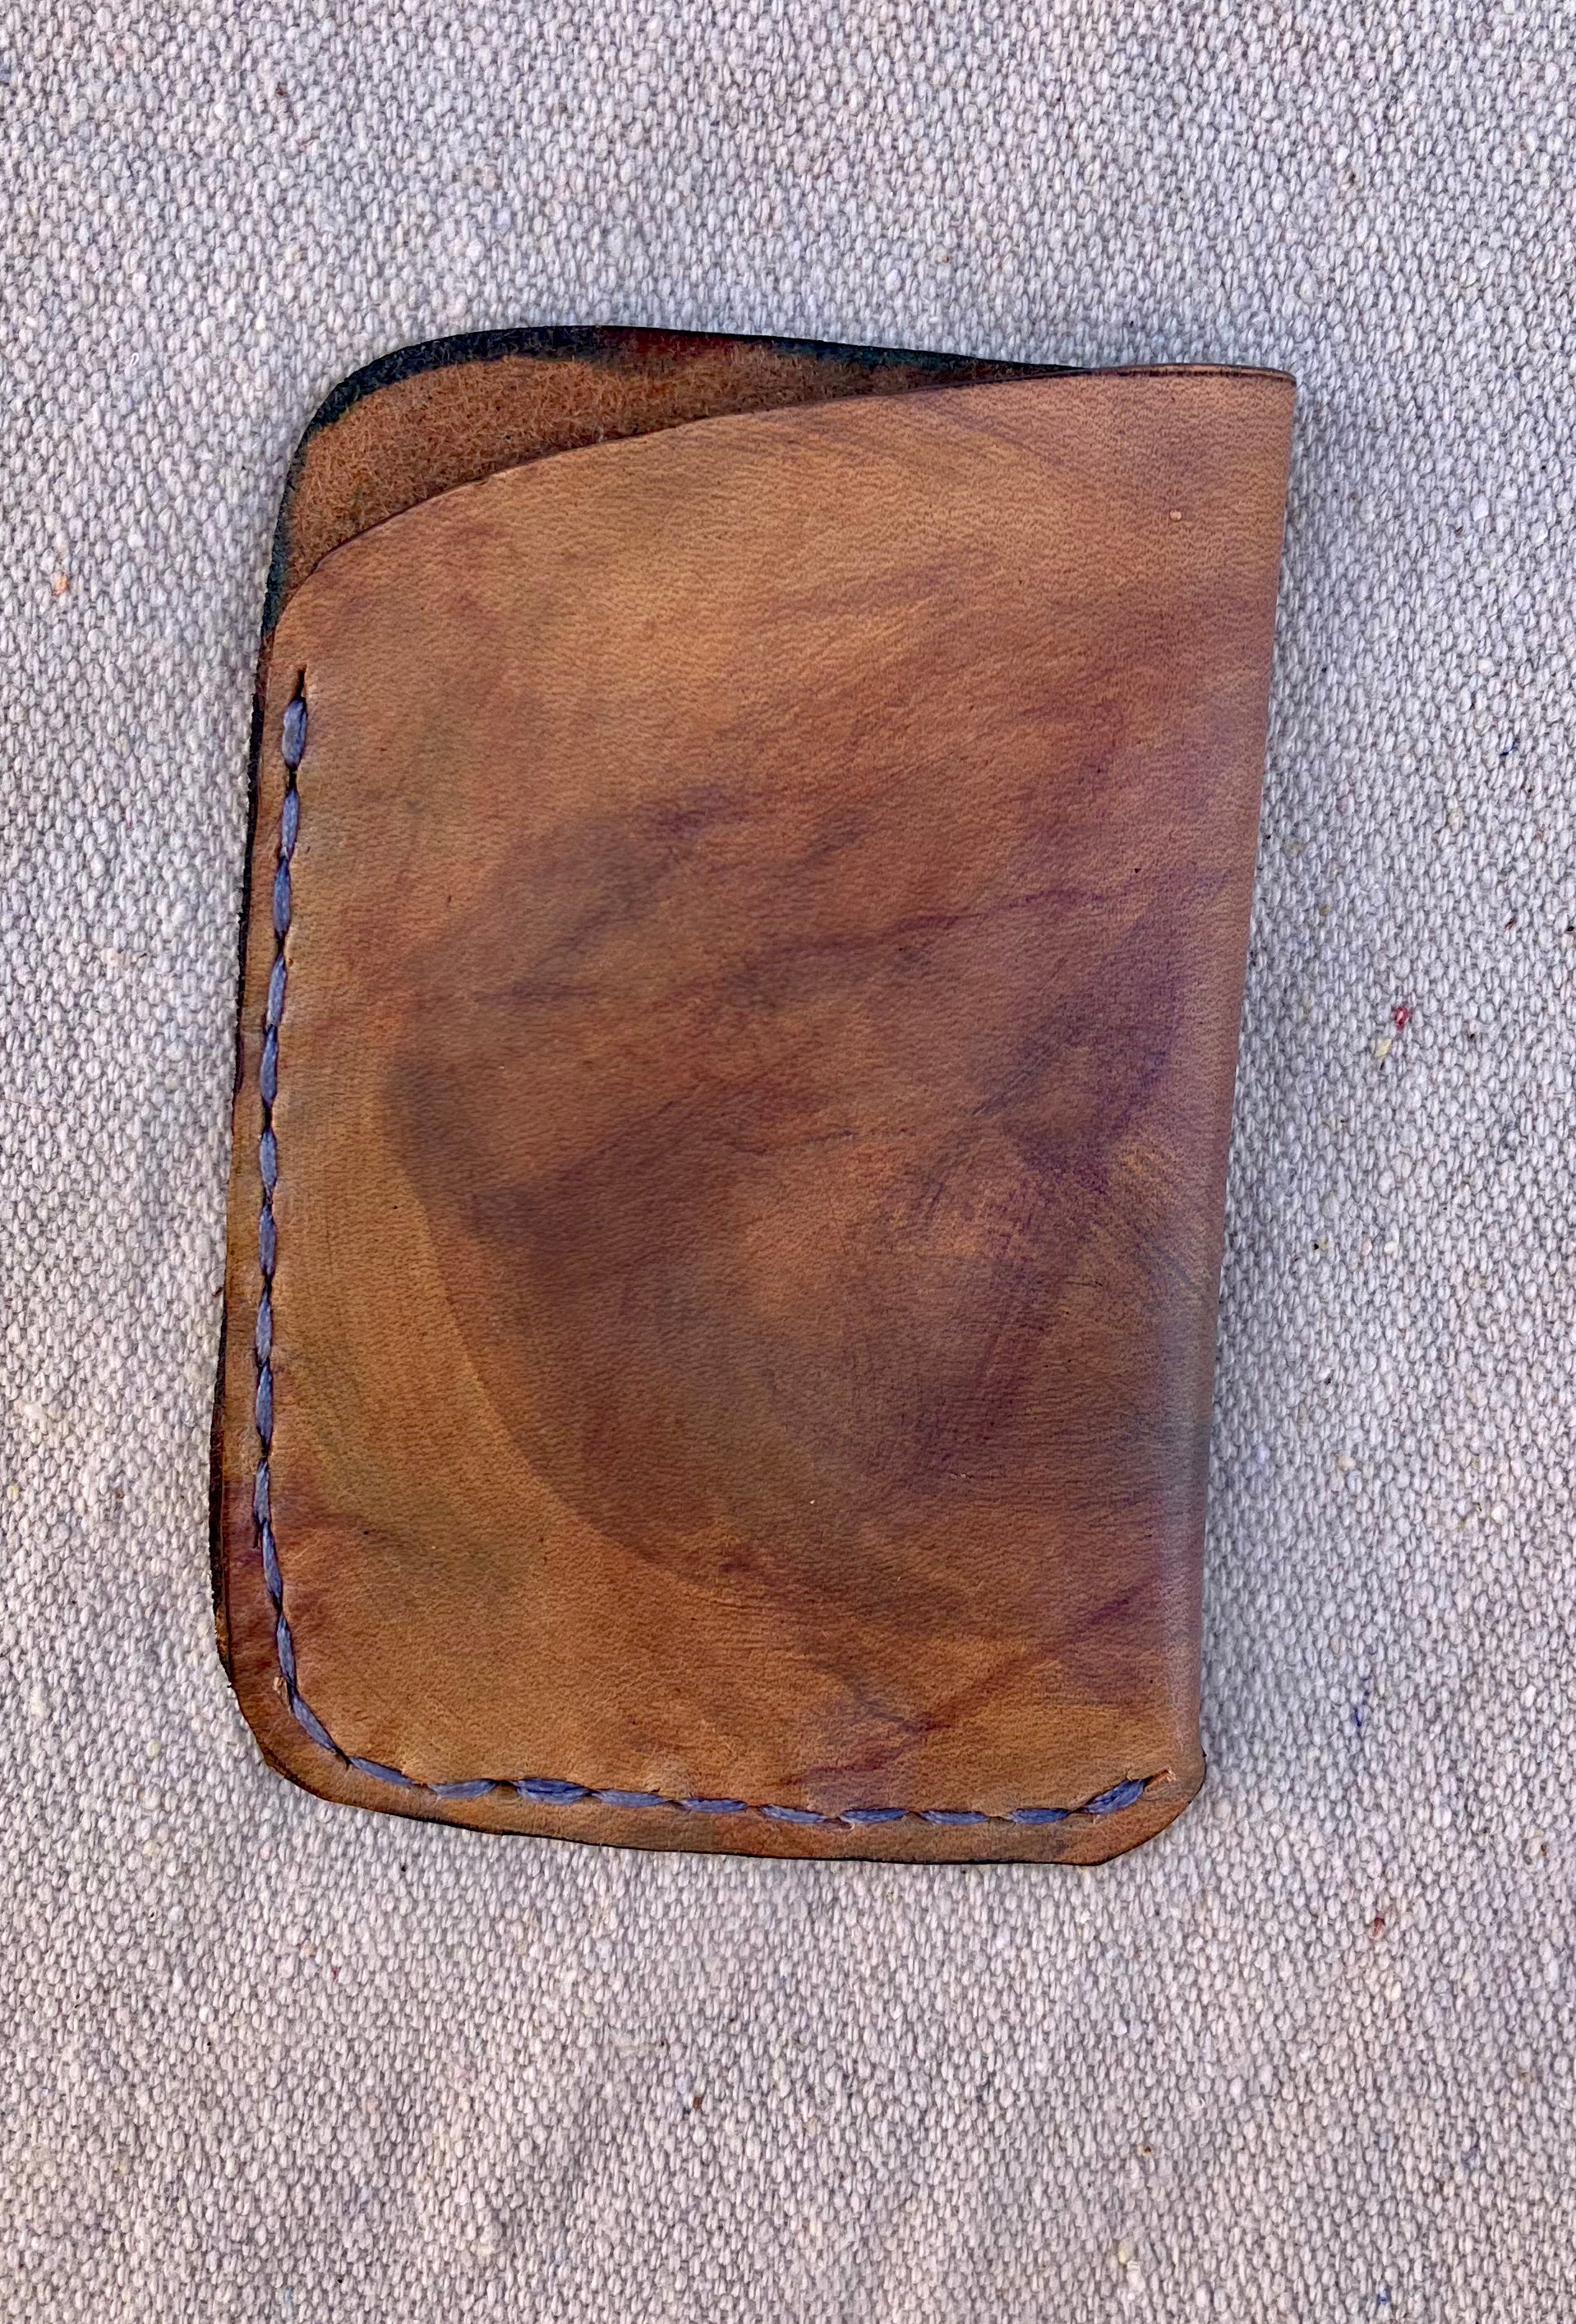 wilder leather’s hand sewn cards holders are a most simple way to carry cards and cash. 2.75x4.2” 